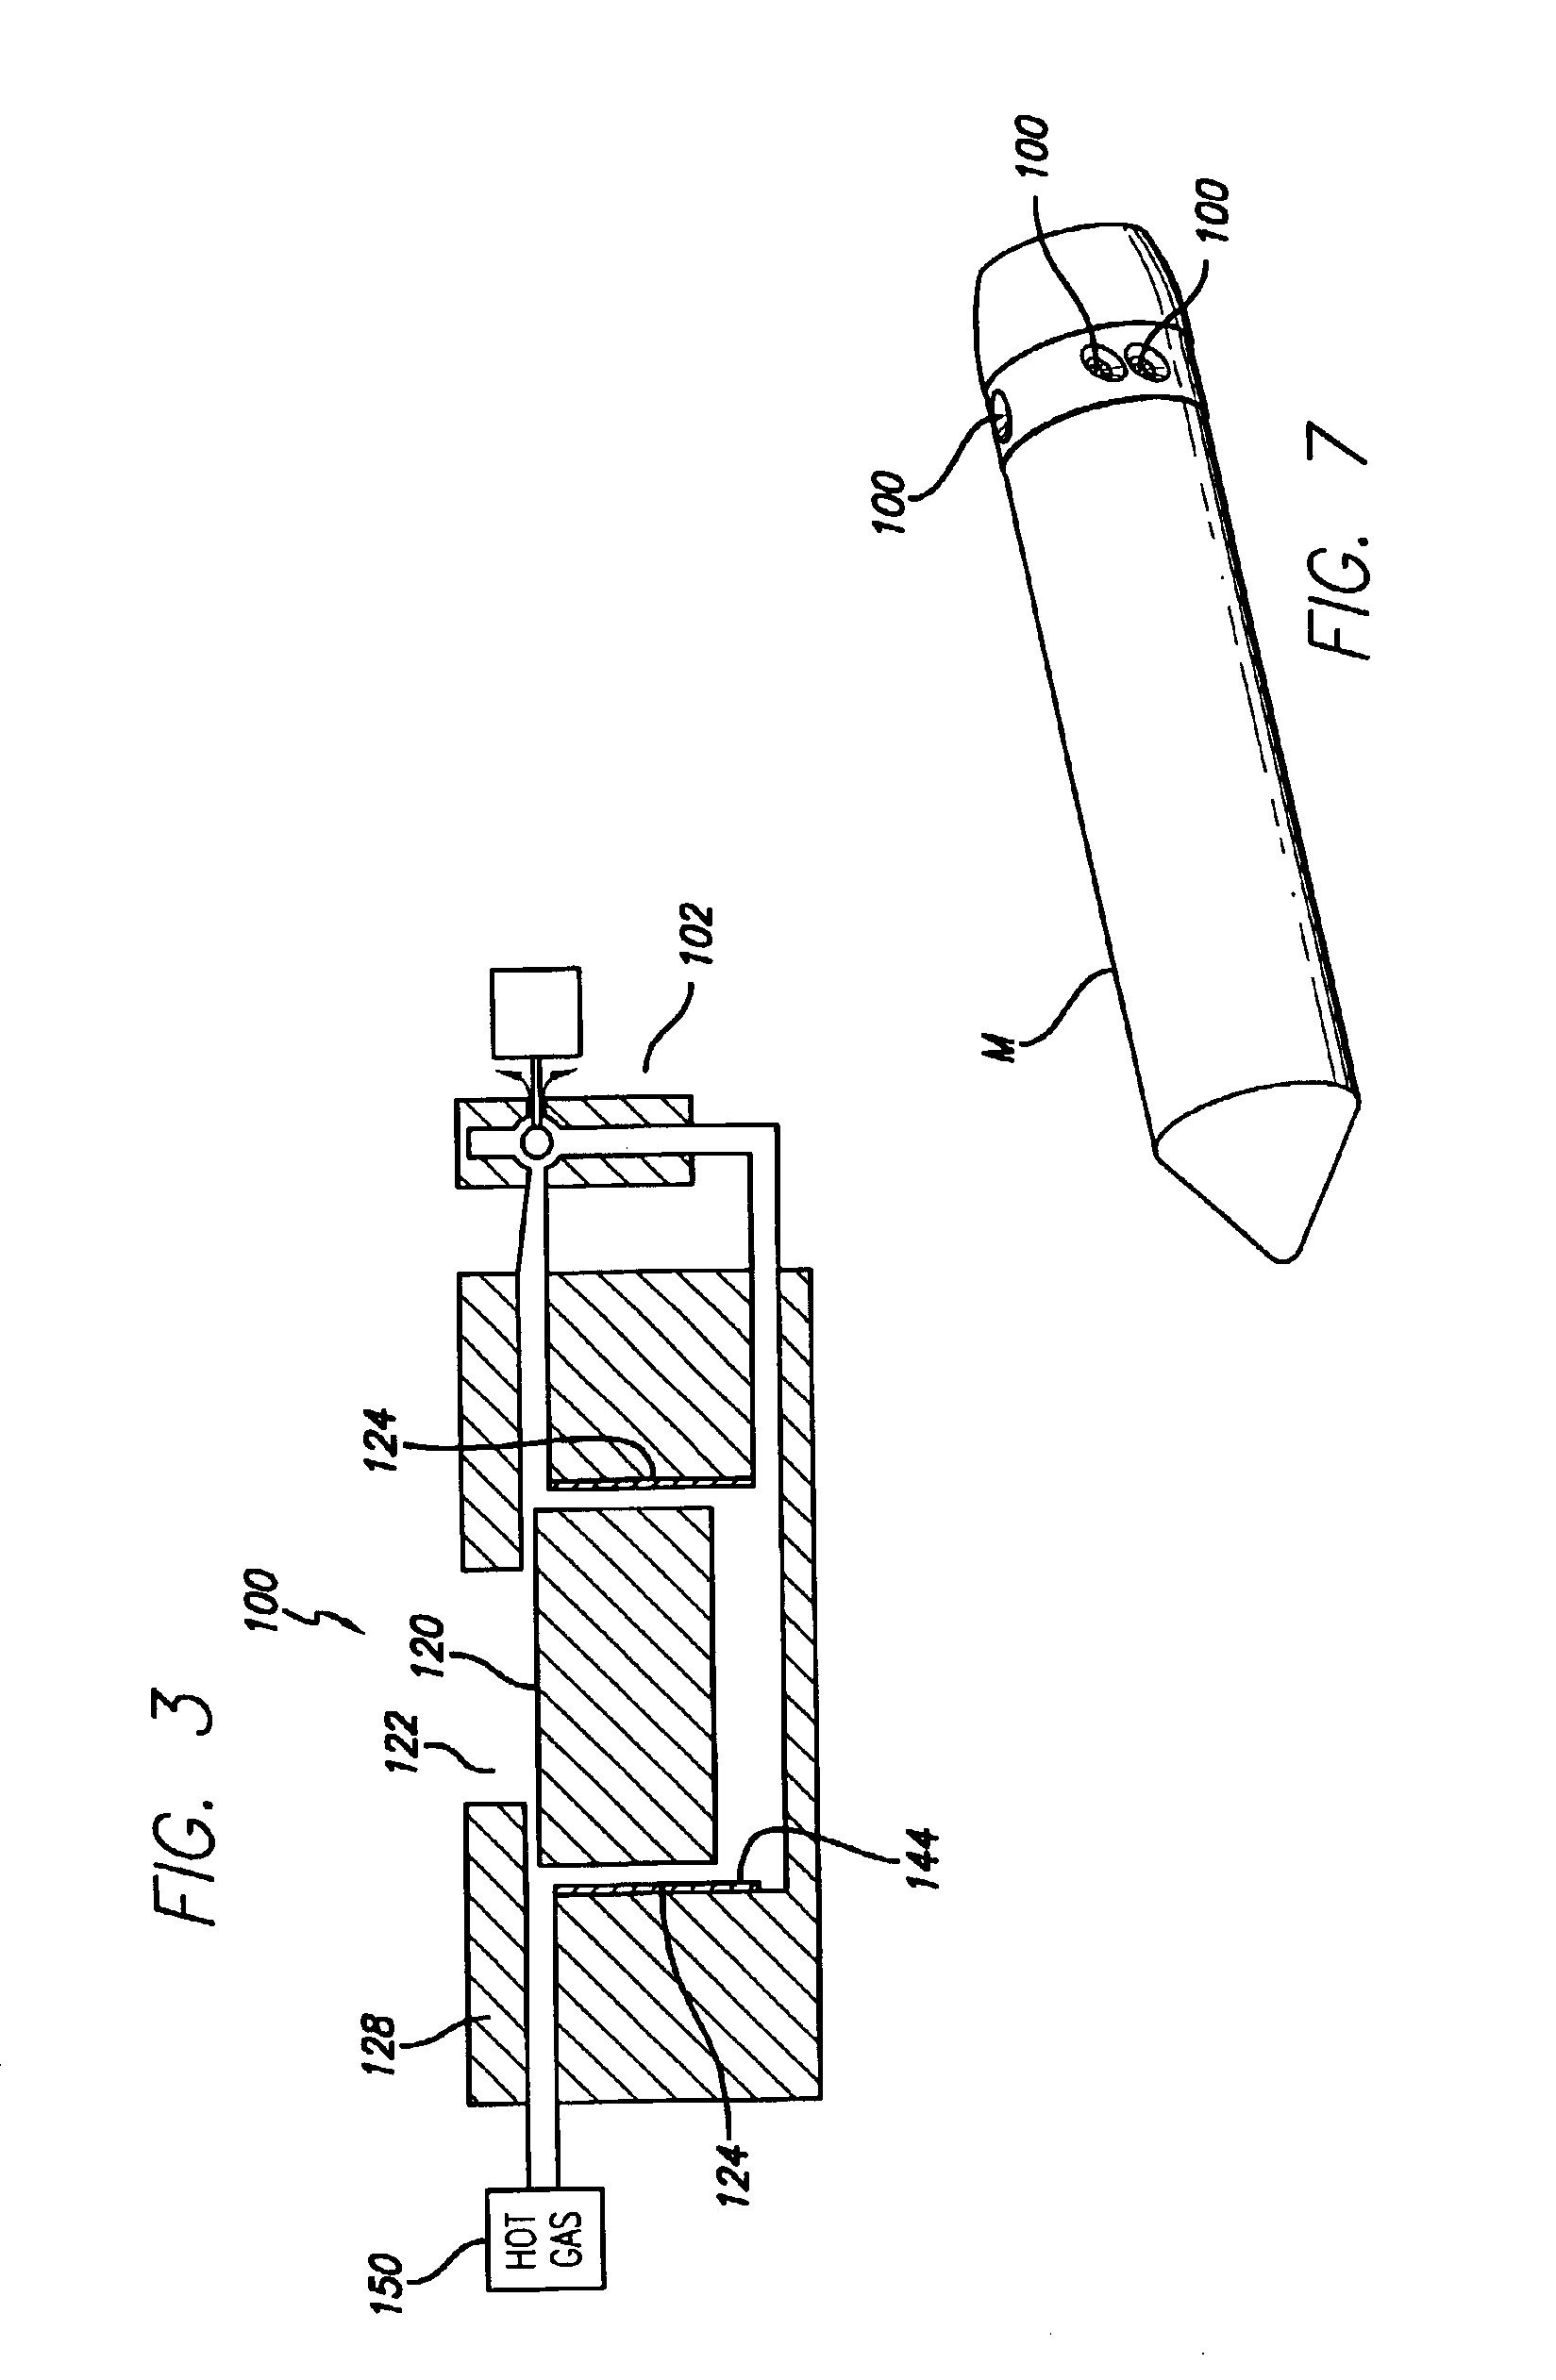 Missile thrust system and valve with refractory piston cylinder